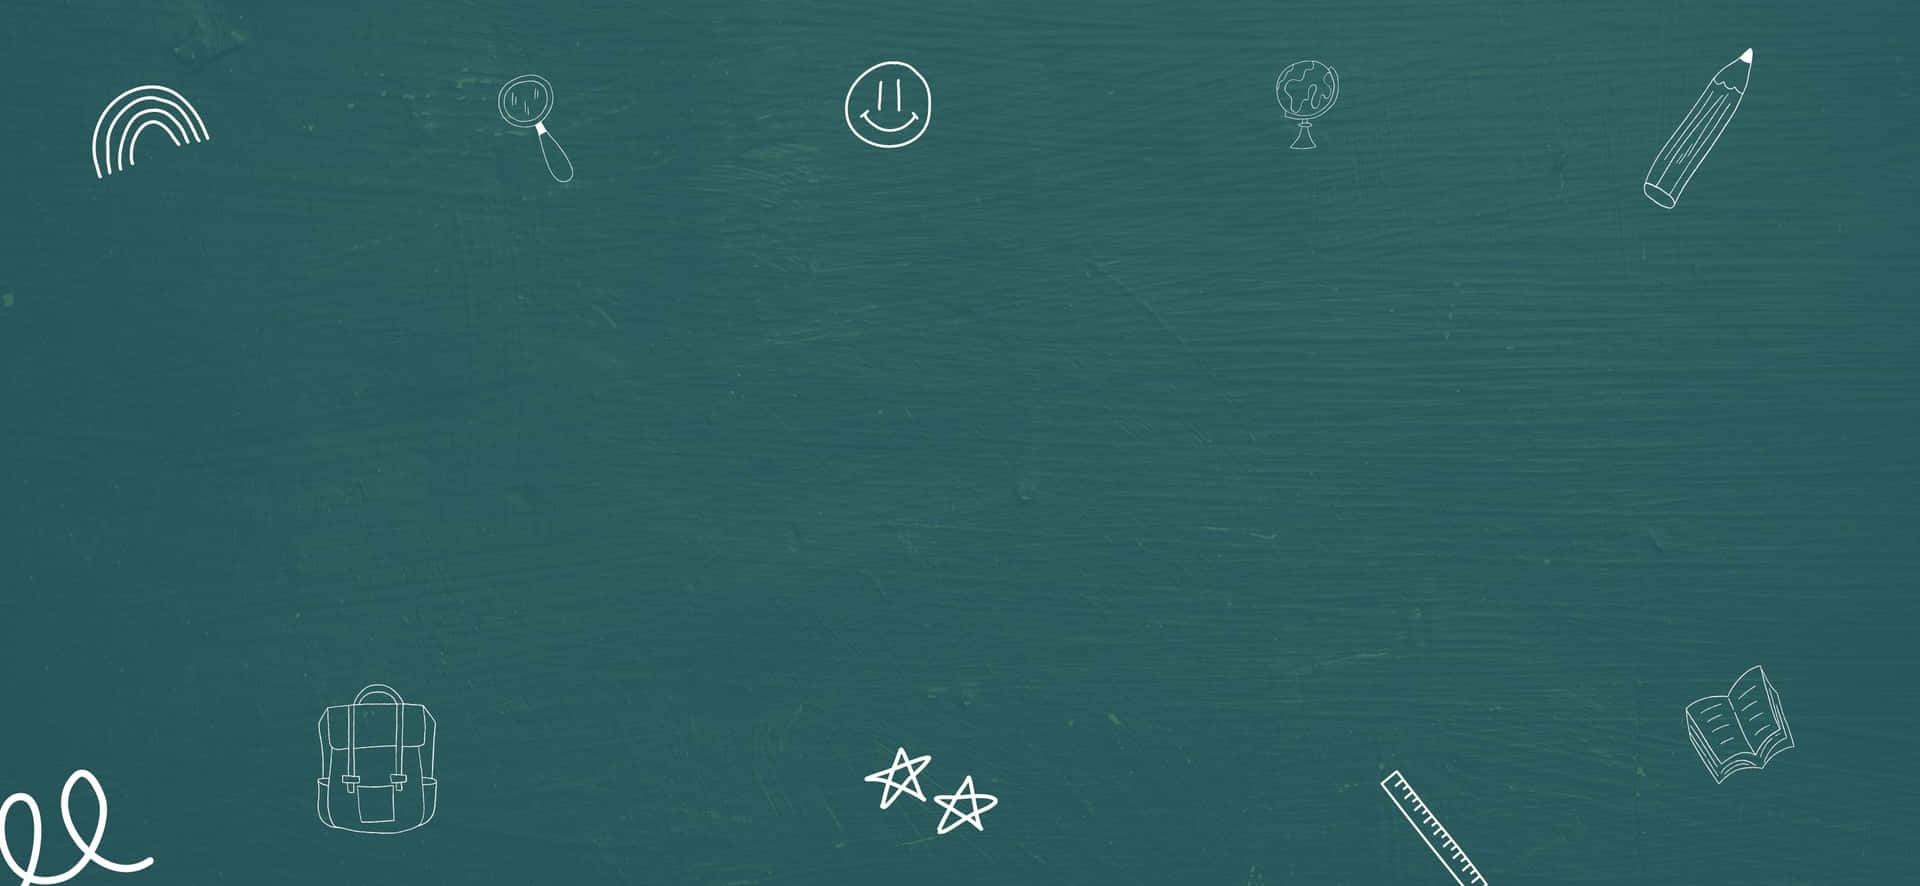 A Blackboard With A Circle Of Doodles Wallpaper